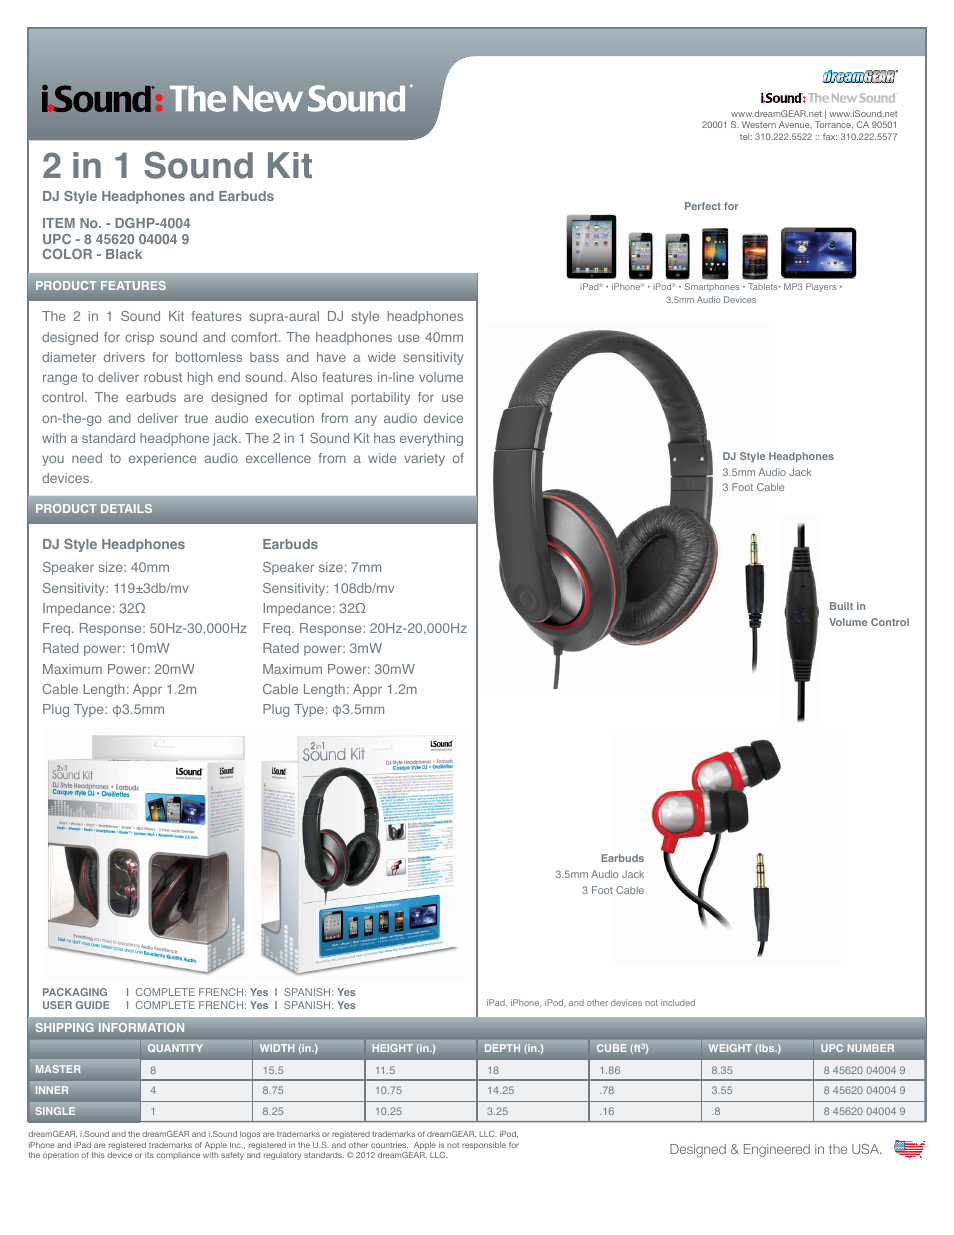 2 in 1 Sound Kit - Sell Sheet